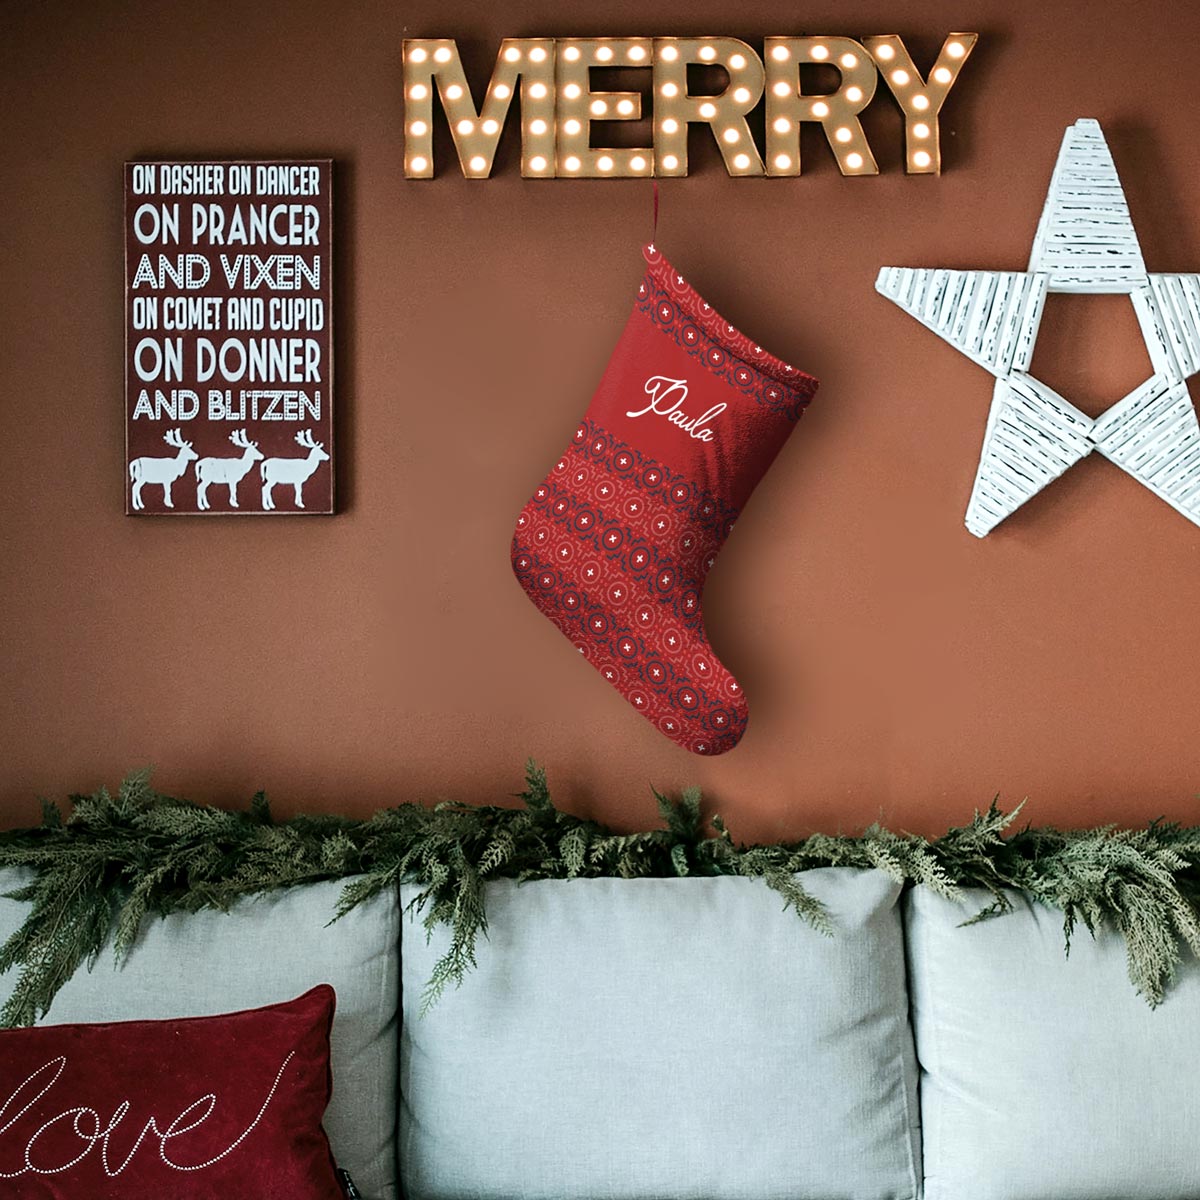 Red Personalizable Christmas Stocking – modern mud cloth tile pattern